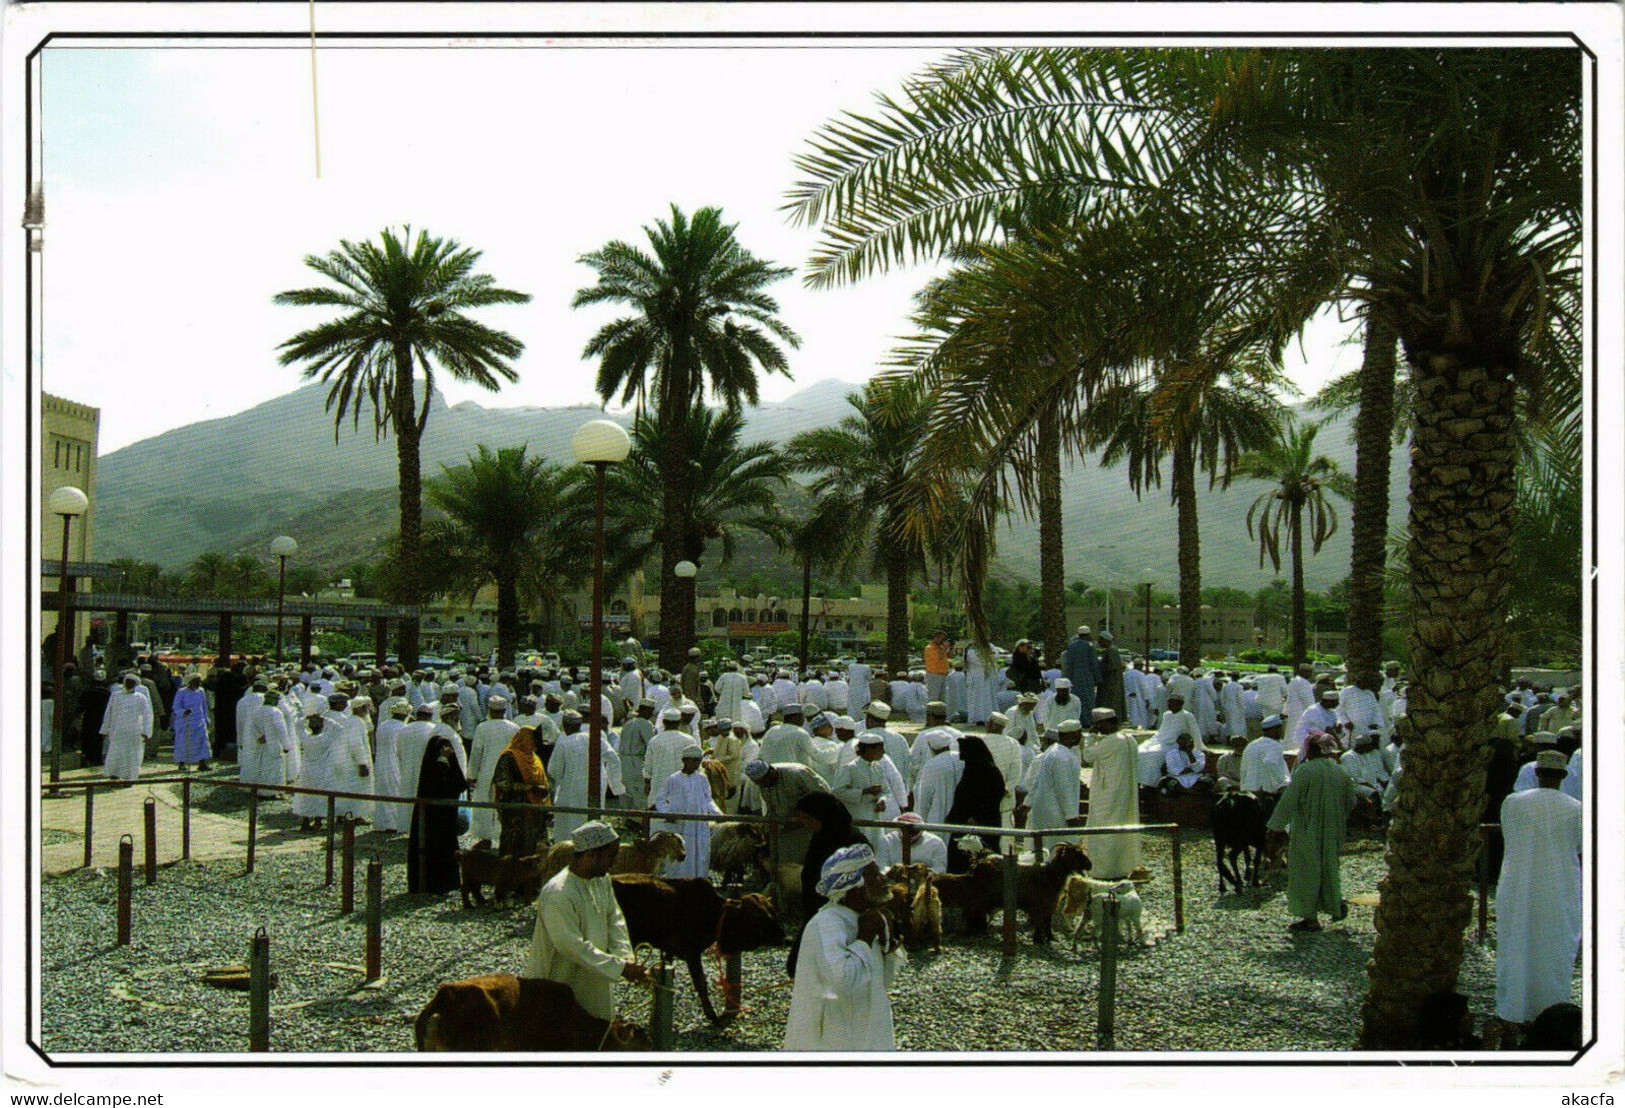 PC CPA SULTANATE OF OMAN, GOAT AUCTION, REAL PHOTO POSTCARD (b16349) - Oman